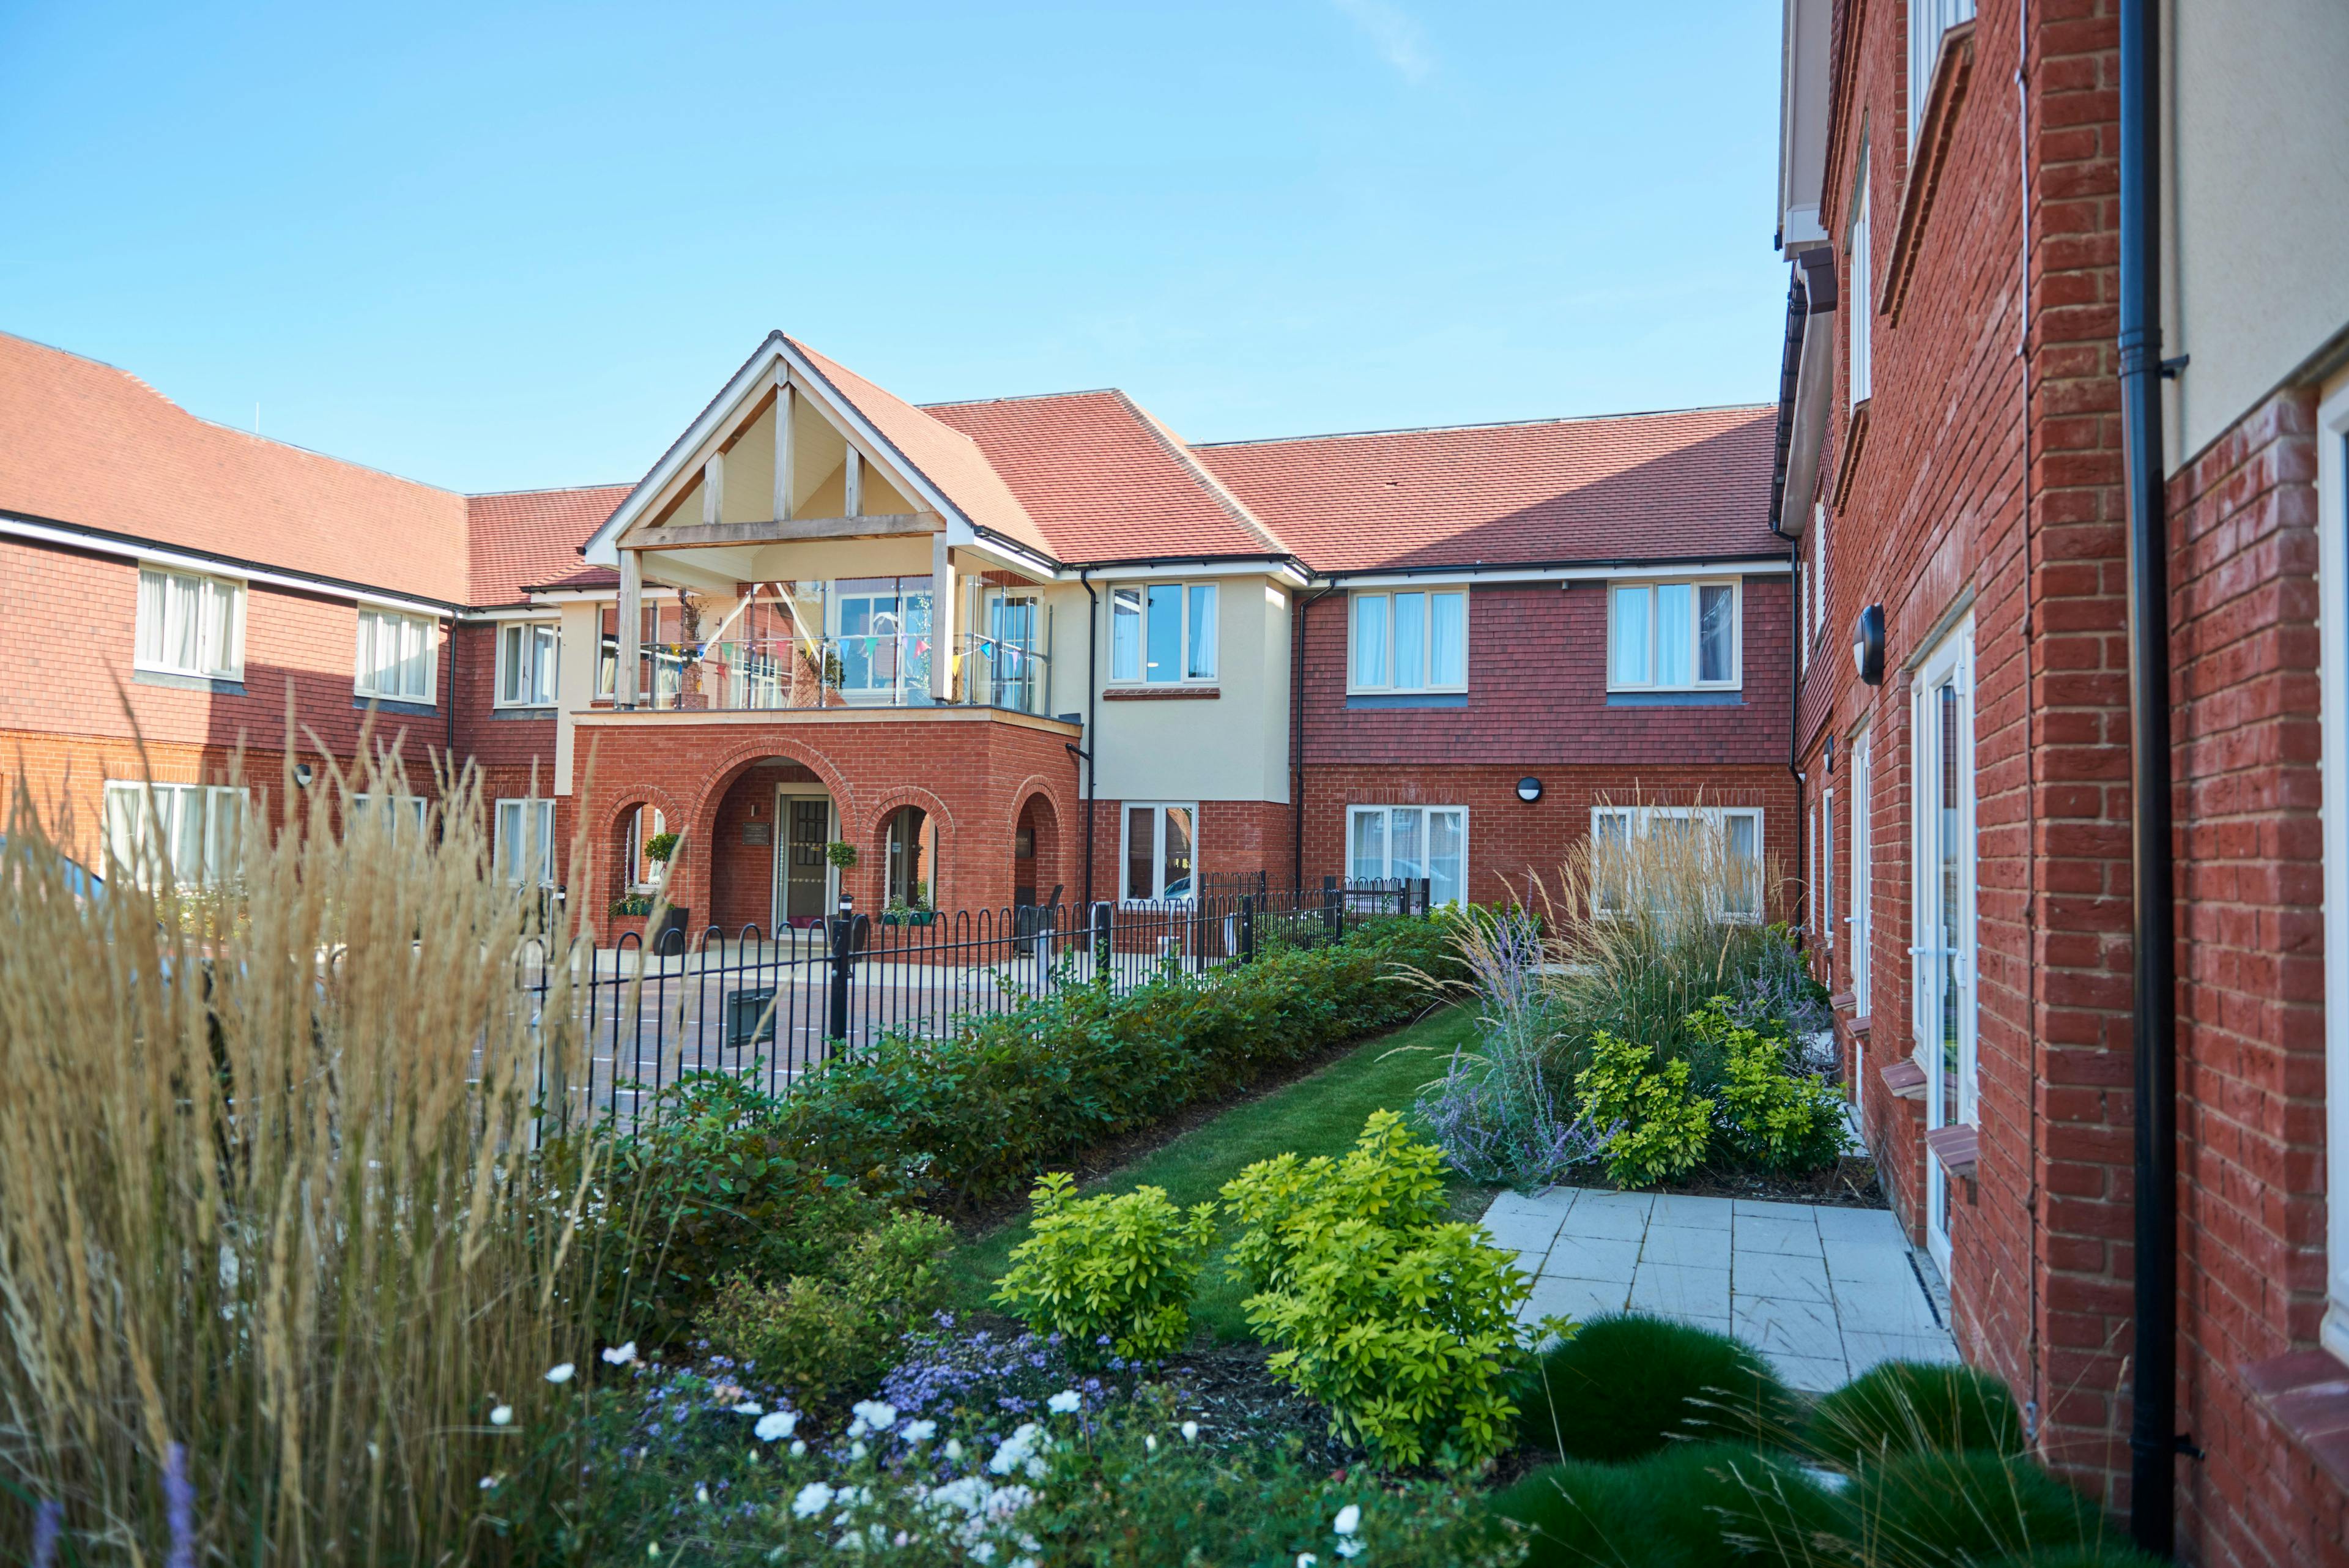 Porthaven Care Homes - Hartfield House care home 3